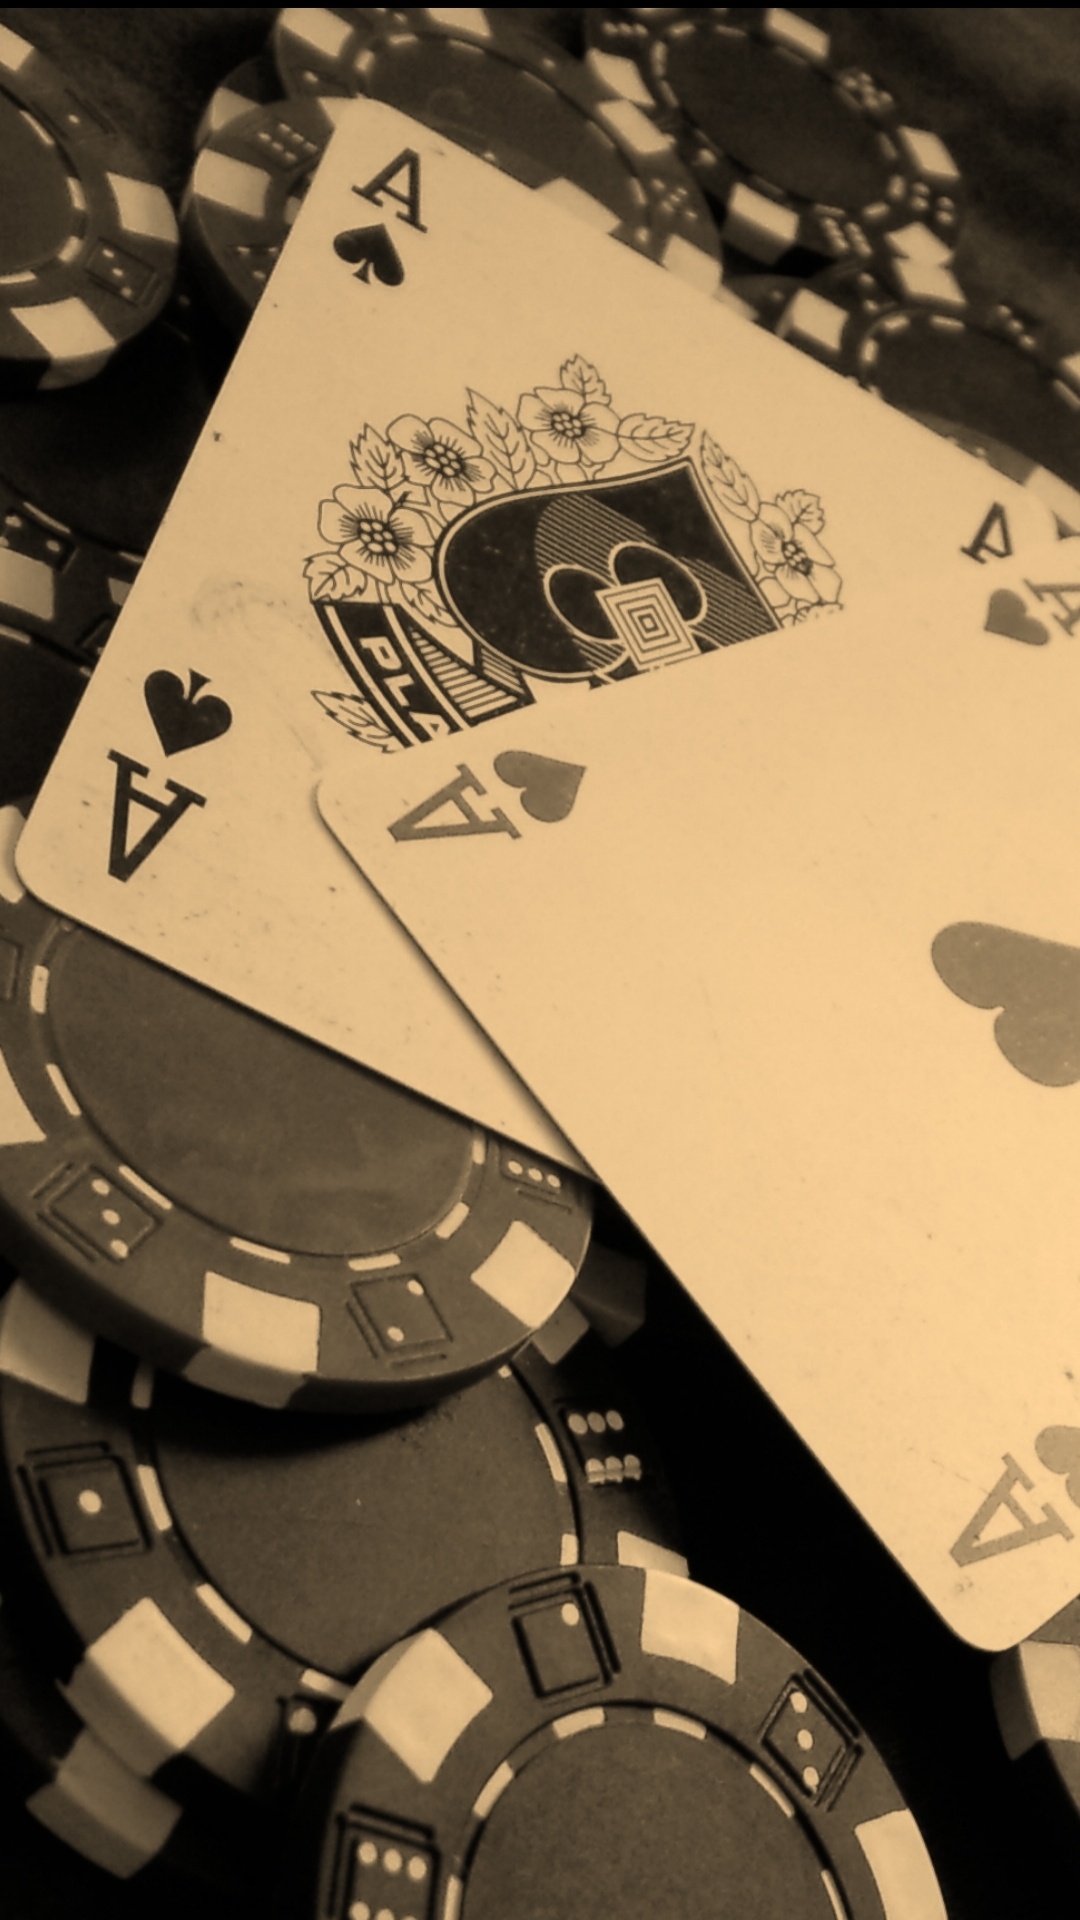 Poker: Minimalistic, Pocked Aces nicknames, American Airlines. 1080x1920 Full HD Wallpaper.